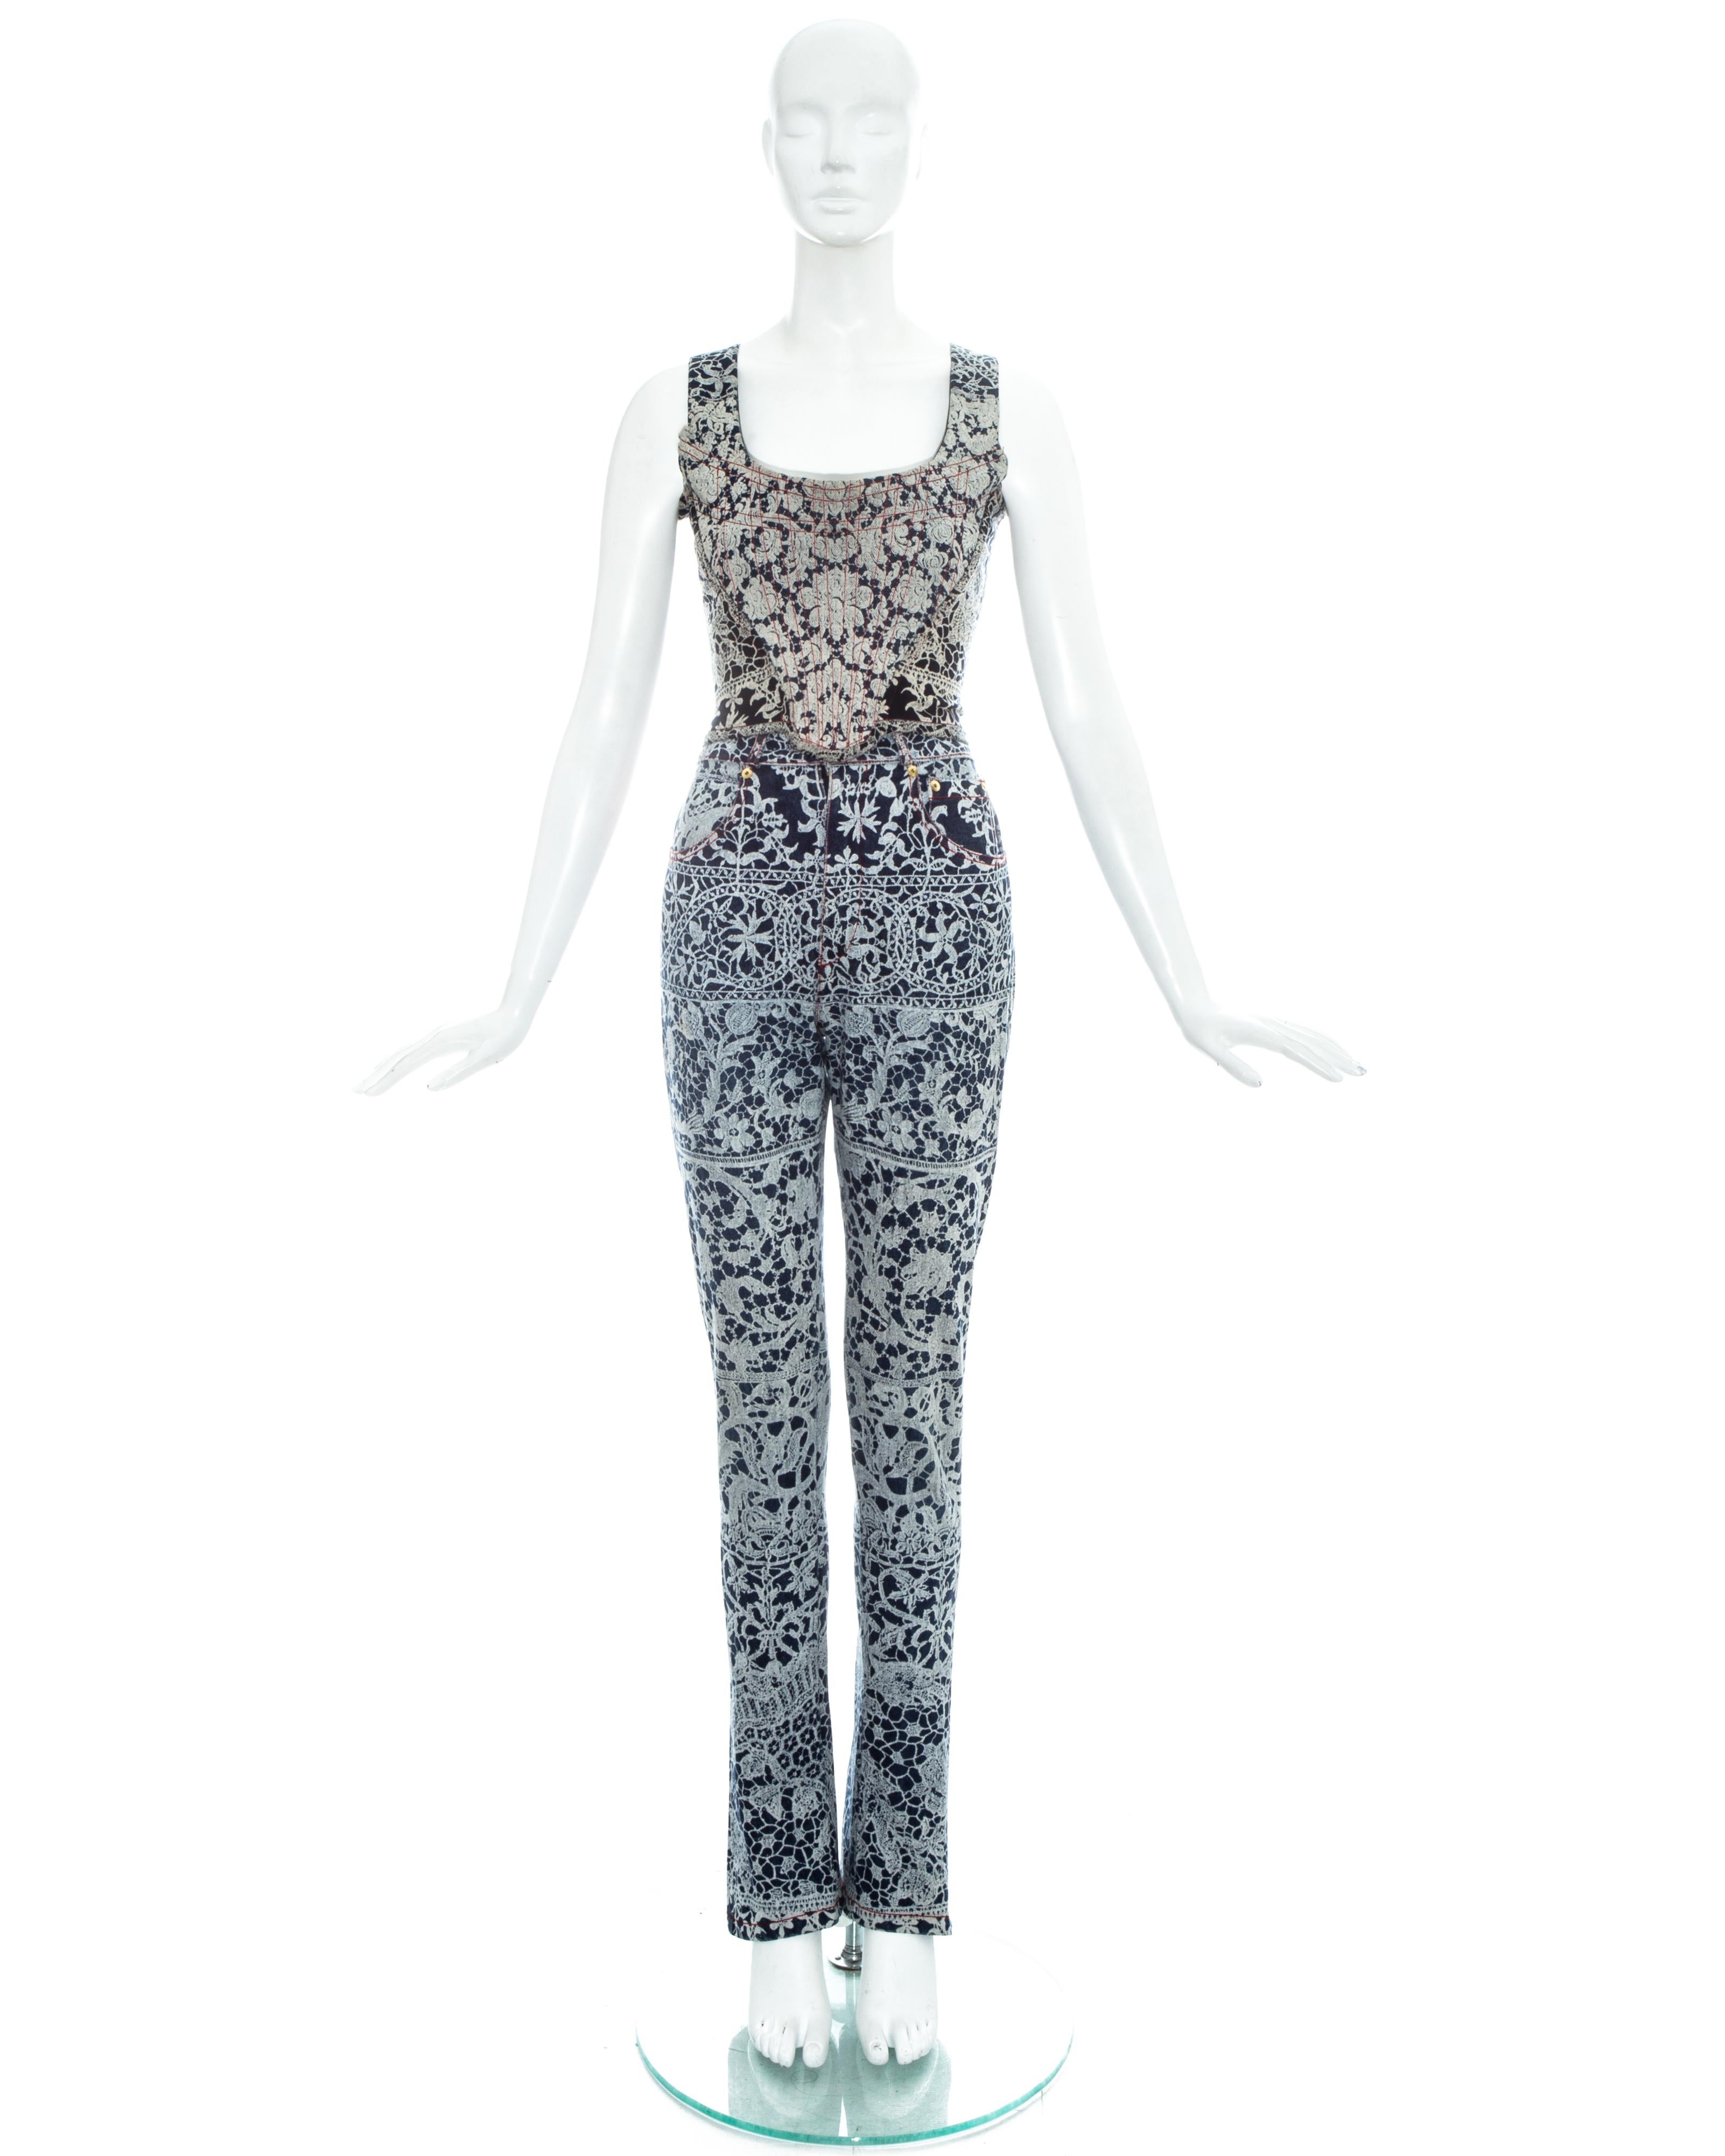 Vivienne Westwood lace screen printed denim corset and high rise slim jeans

Fall-Winter 1992